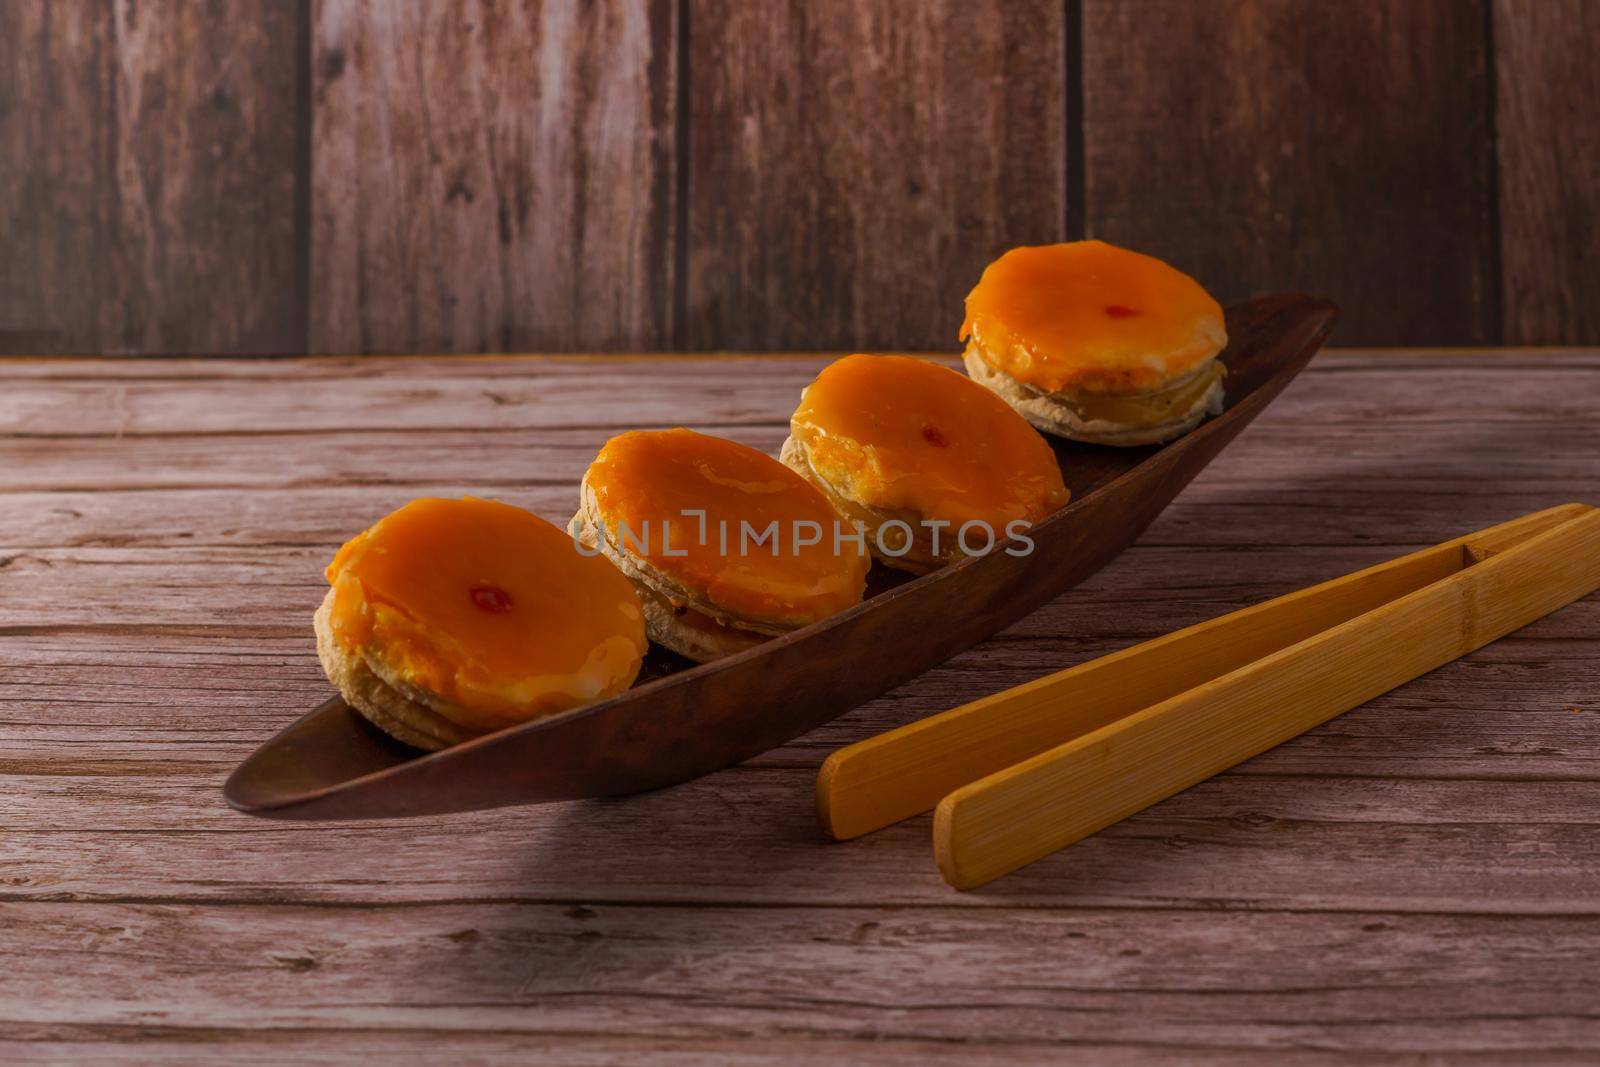 tortas locas or crazy cakes typical of andalucia, spain on a wooden bowl and some tongs